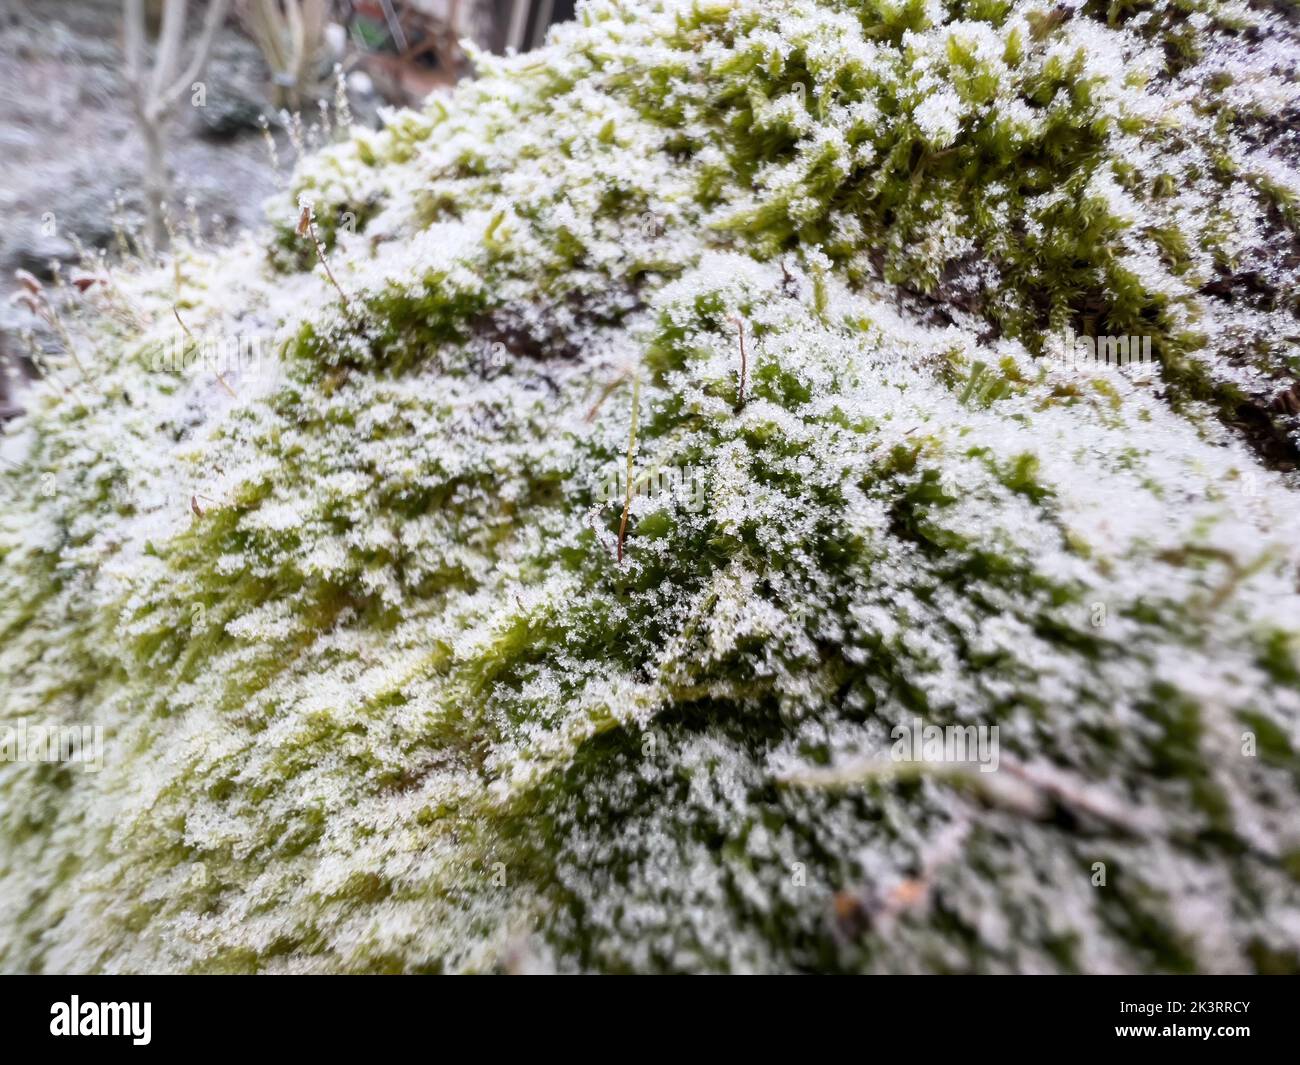 Moss-covered tree trunk covered with snow flakes Stock Photo